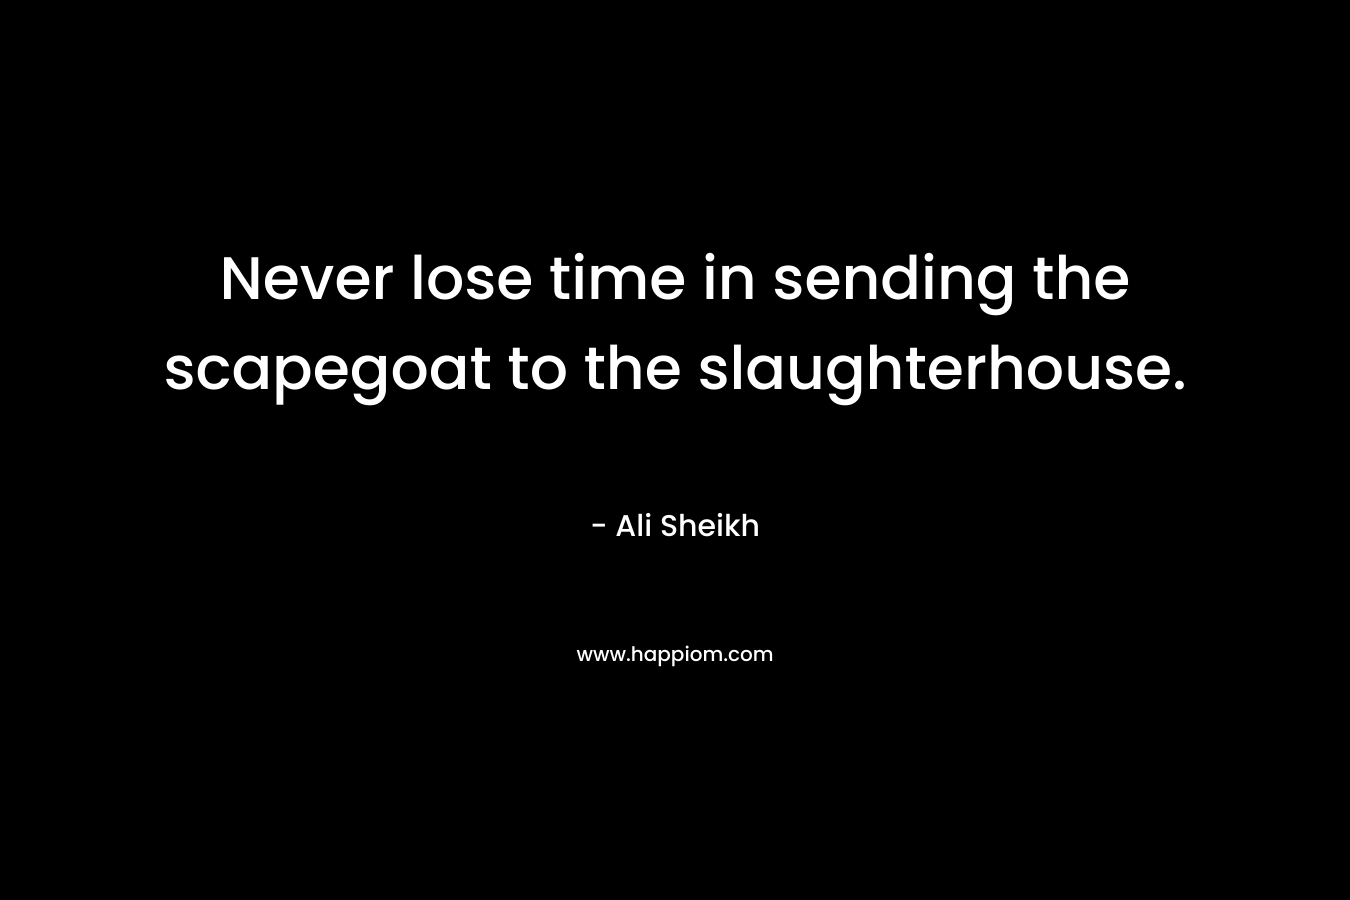 Never lose time in sending the scapegoat to the slaughterhouse. – Ali Sheikh